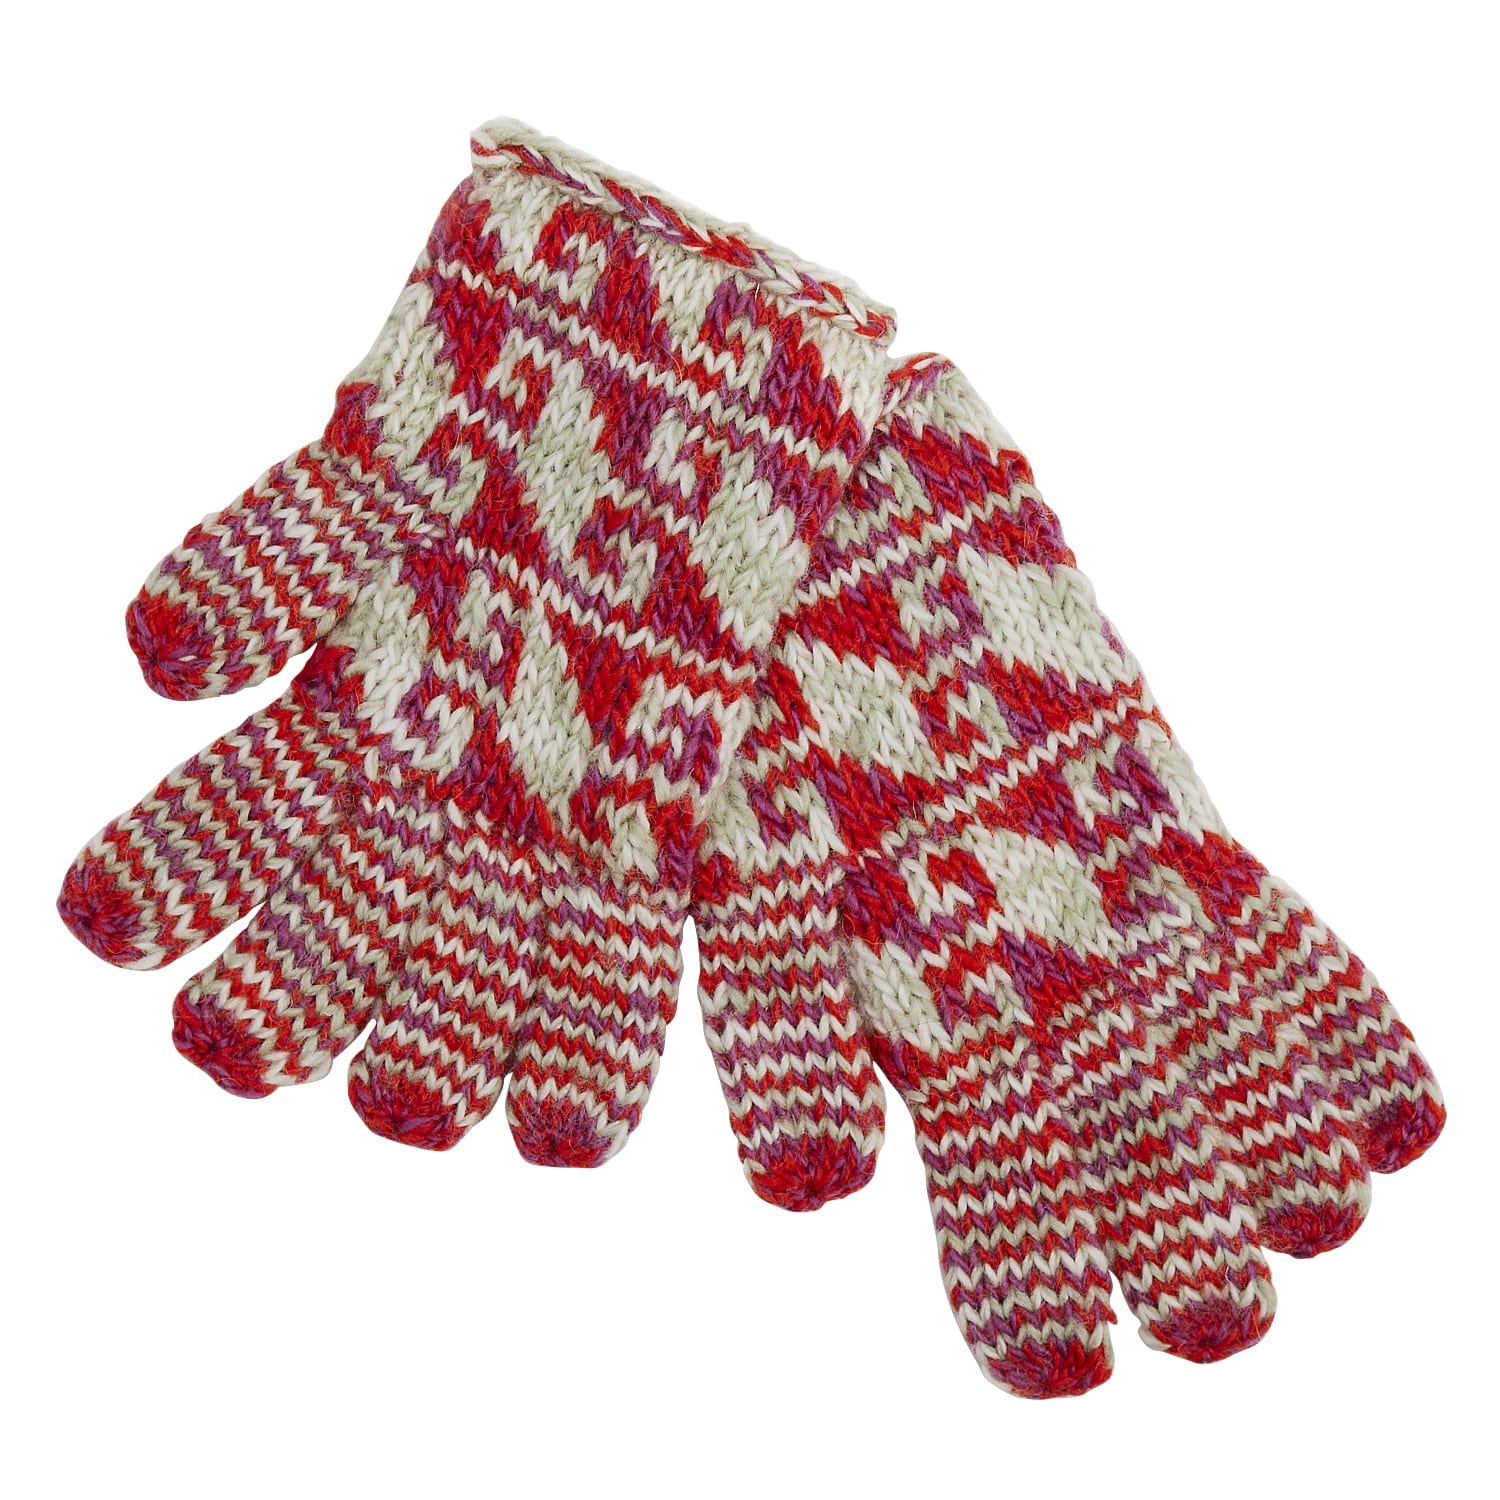 TEN THOUSAND VILLAGES: Wrap your hands in woolly warmth with these gloves from Nepal. Each pair featuring a traditional tribal pattern, these gloves are knitted by the women of the Sana Hastakala artisan group. Suggested retail price, $24. 967 Farmington Avenue, West Hartford Center, 860-233-5470 www.tenthousandvillages.com